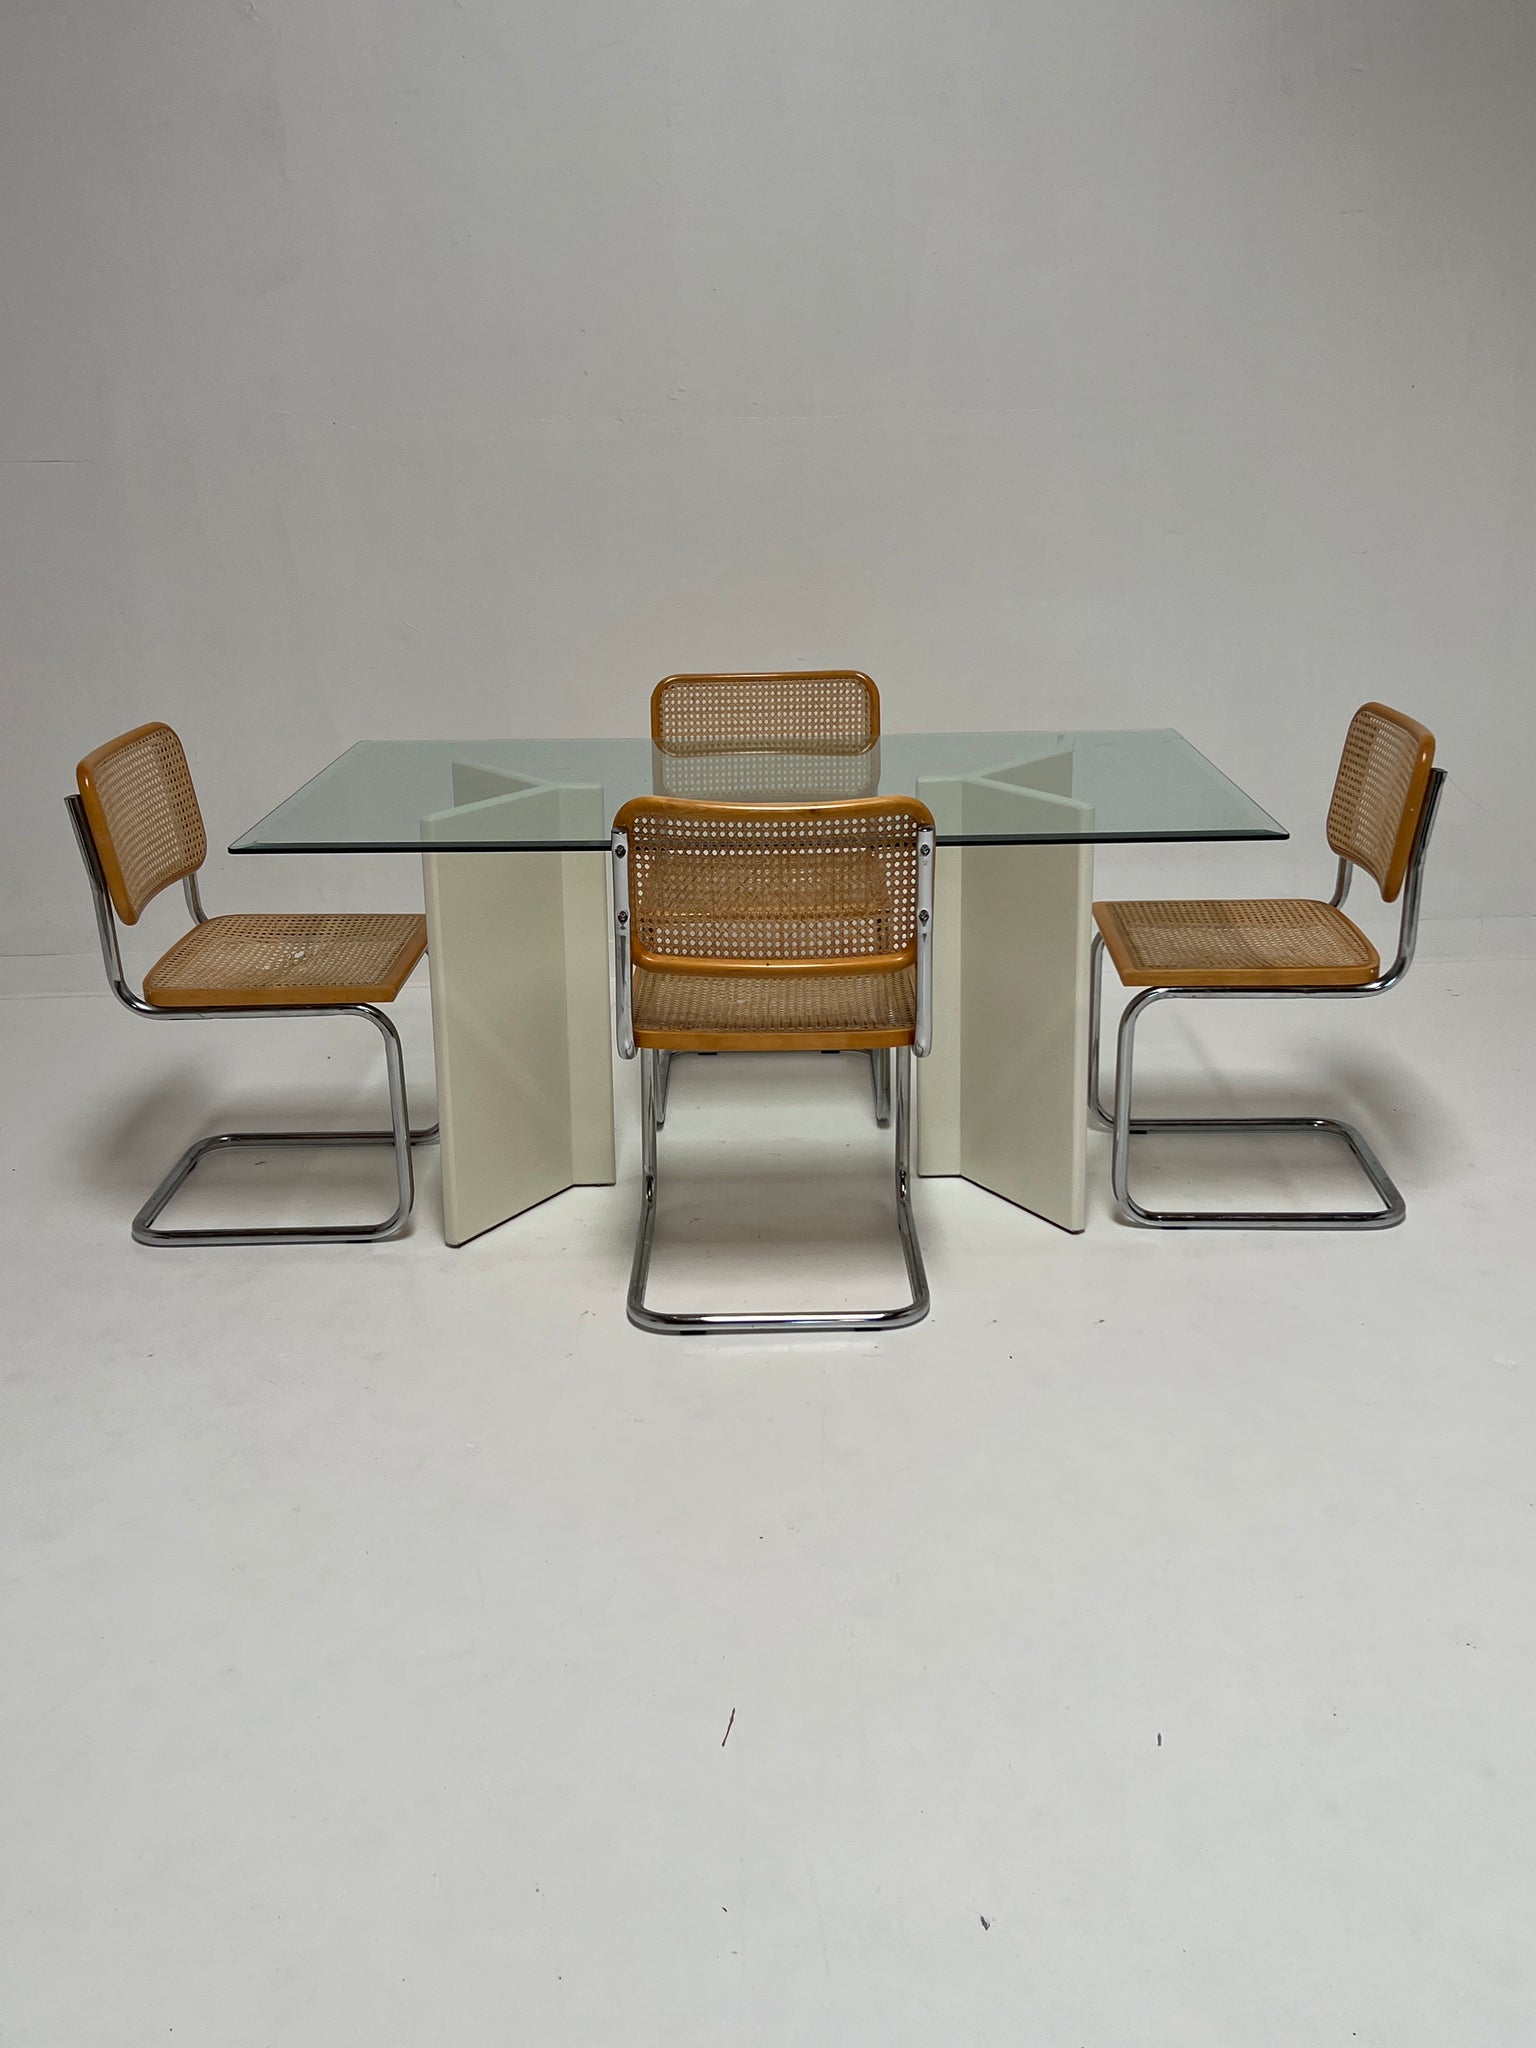 Post Modern Double Pedestal Glass Dining Table